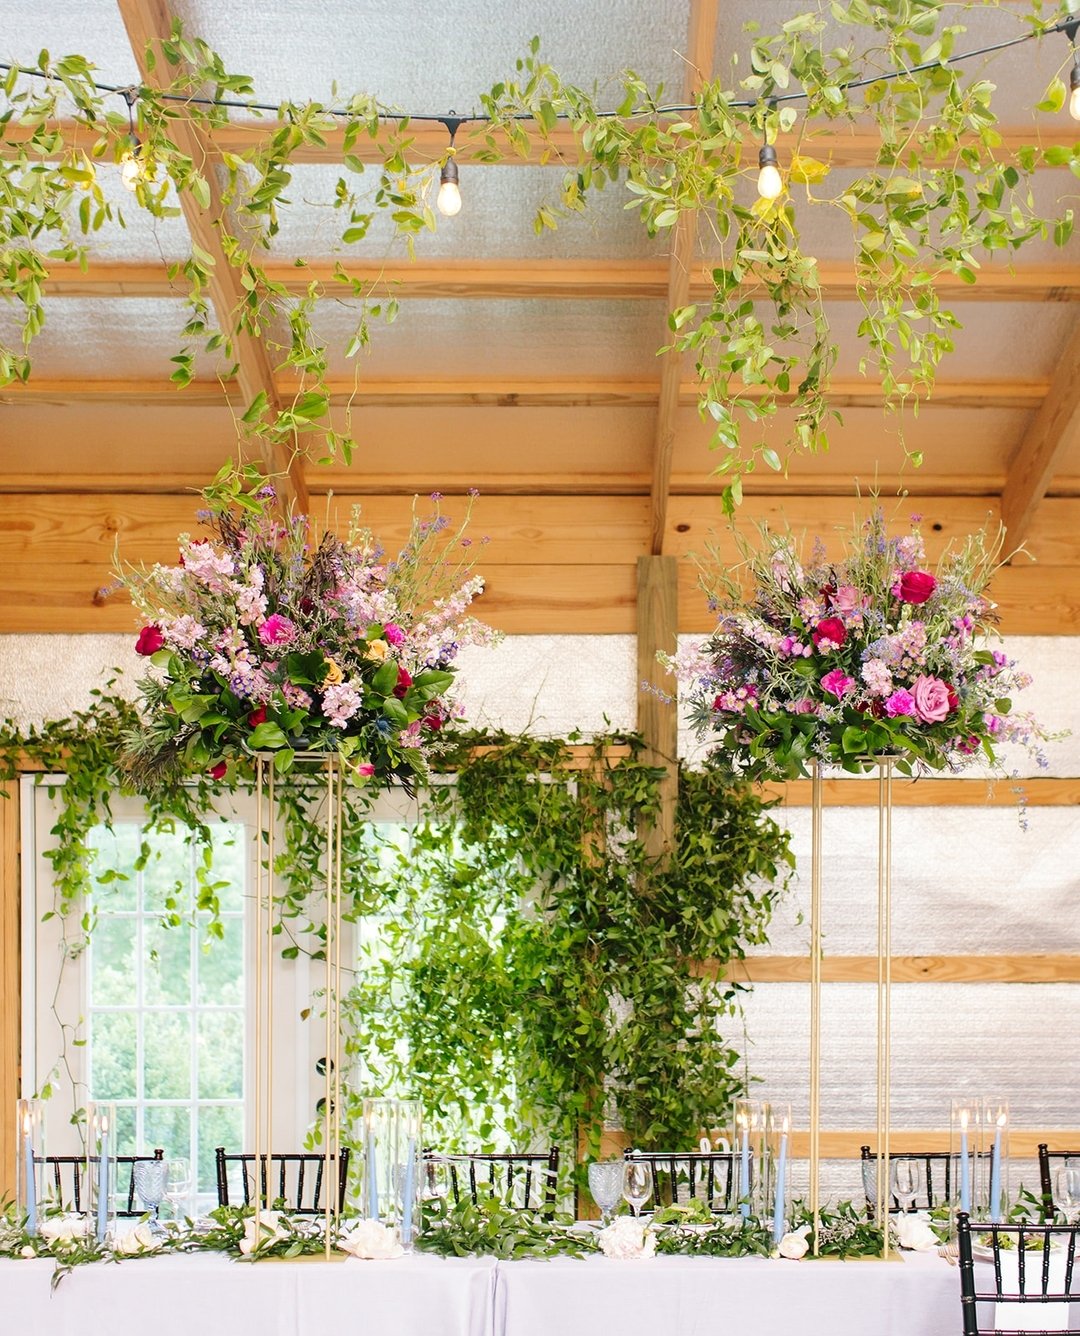 So, this is a barn. With a kind of unfinished wall back there. 
But, it's a pretty vineyard, yummy wine and outdoor views...
So, we brought the flowers up front and over the top and added greenery galore.
If your space needs a dot of creativity to el